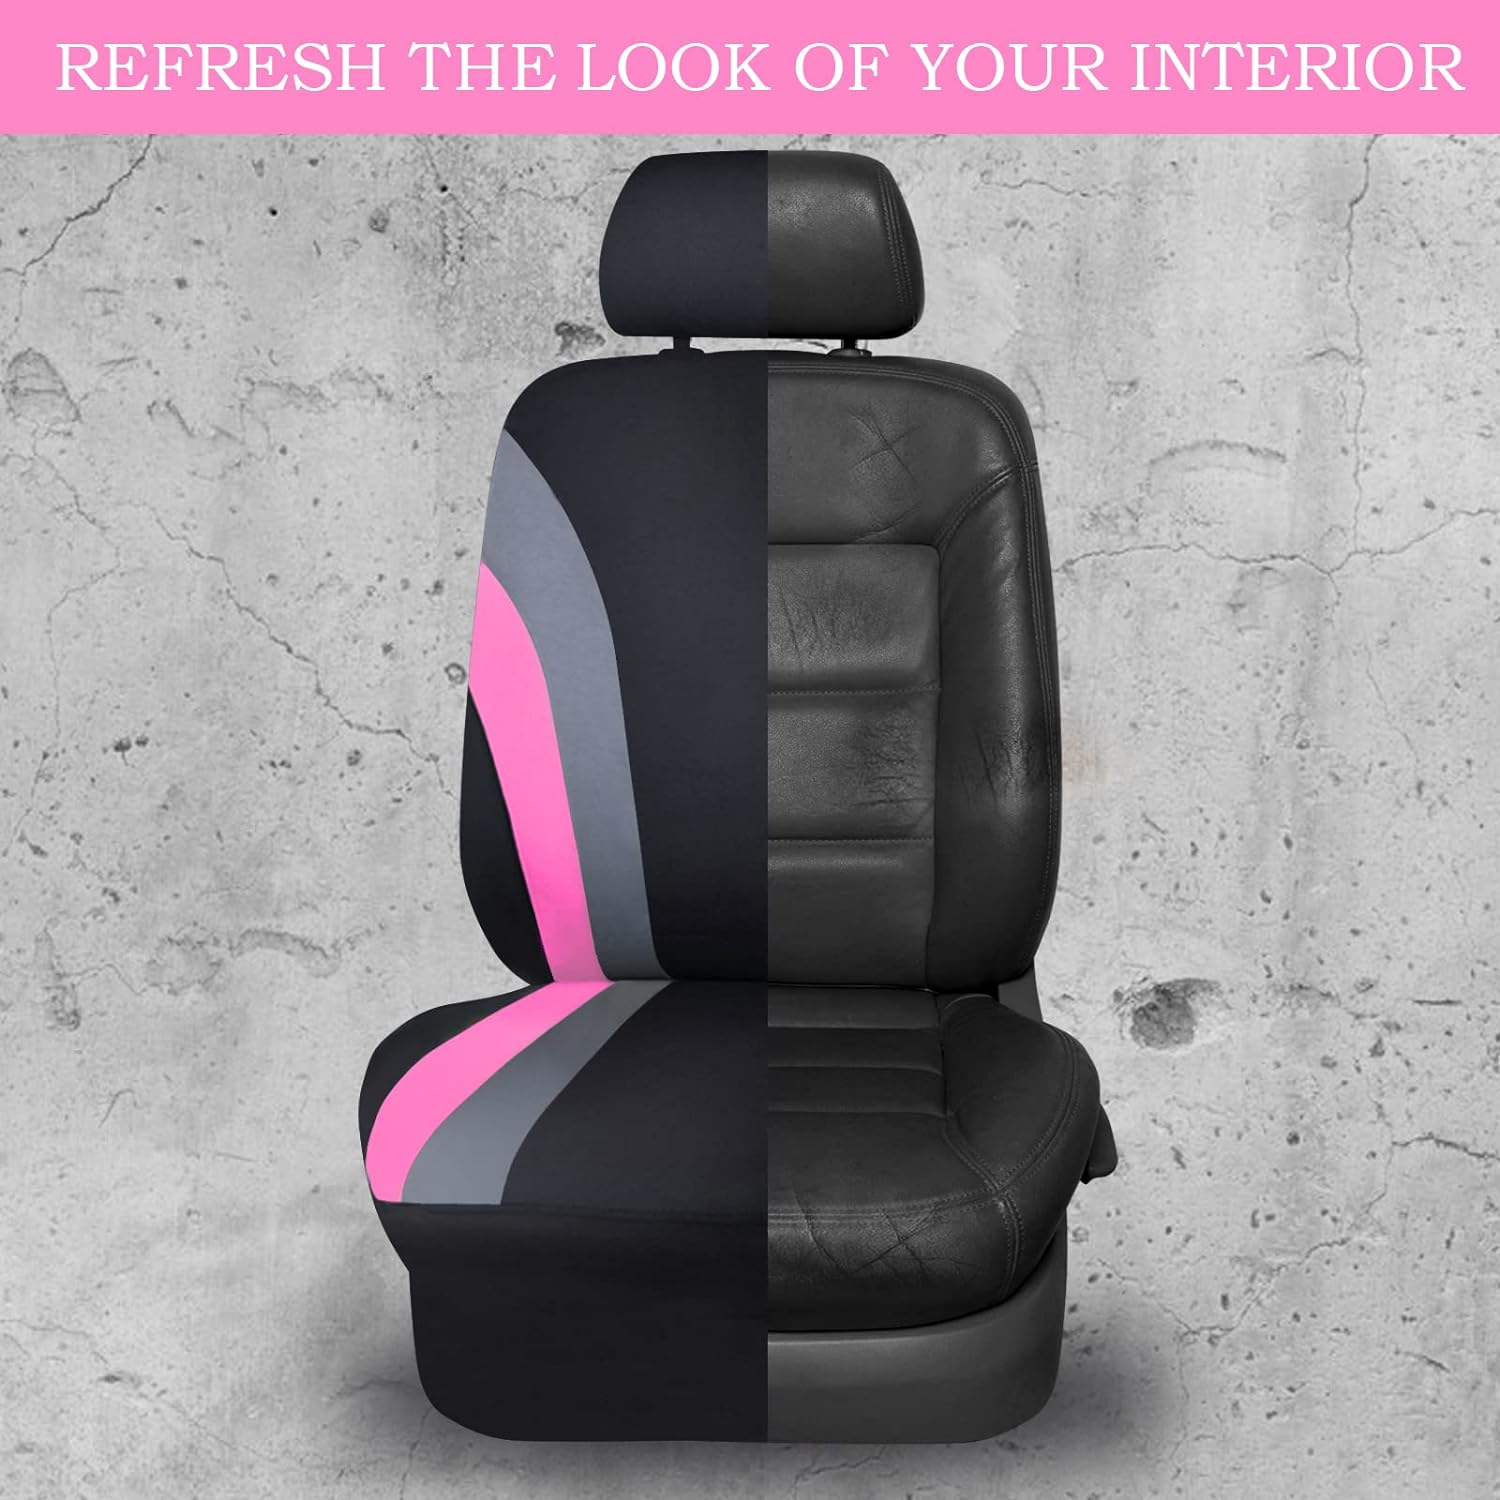 CAR PASS Line Rider Sporty Steering Wheel Cover and Car Seat Cover Sets. 11PCS Universal Fit Car Seat Cover with 14.5-15 Inch Steering Wheel Cover.(Black and Pink)